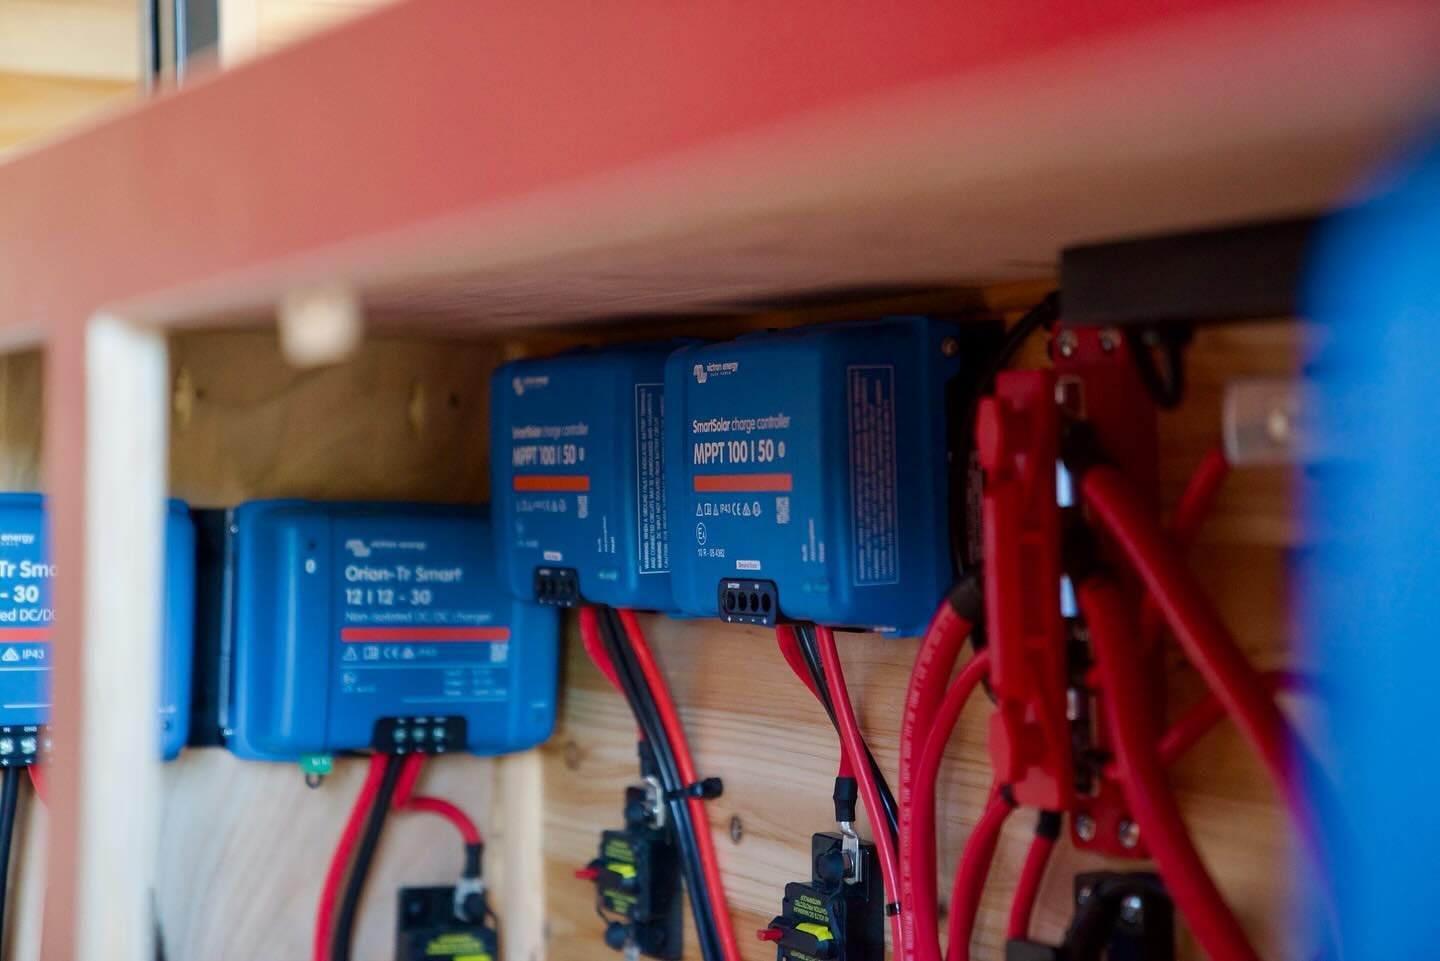 Our biggest and baddest electrical system to date! This  puppy features 800aH of Victron Lithium Ion batteries, a 5,000watt inverter charger, 2 DC-DC chargers, 2 MPPT charge controls for both roof and ground solar and more! What does this all power? 